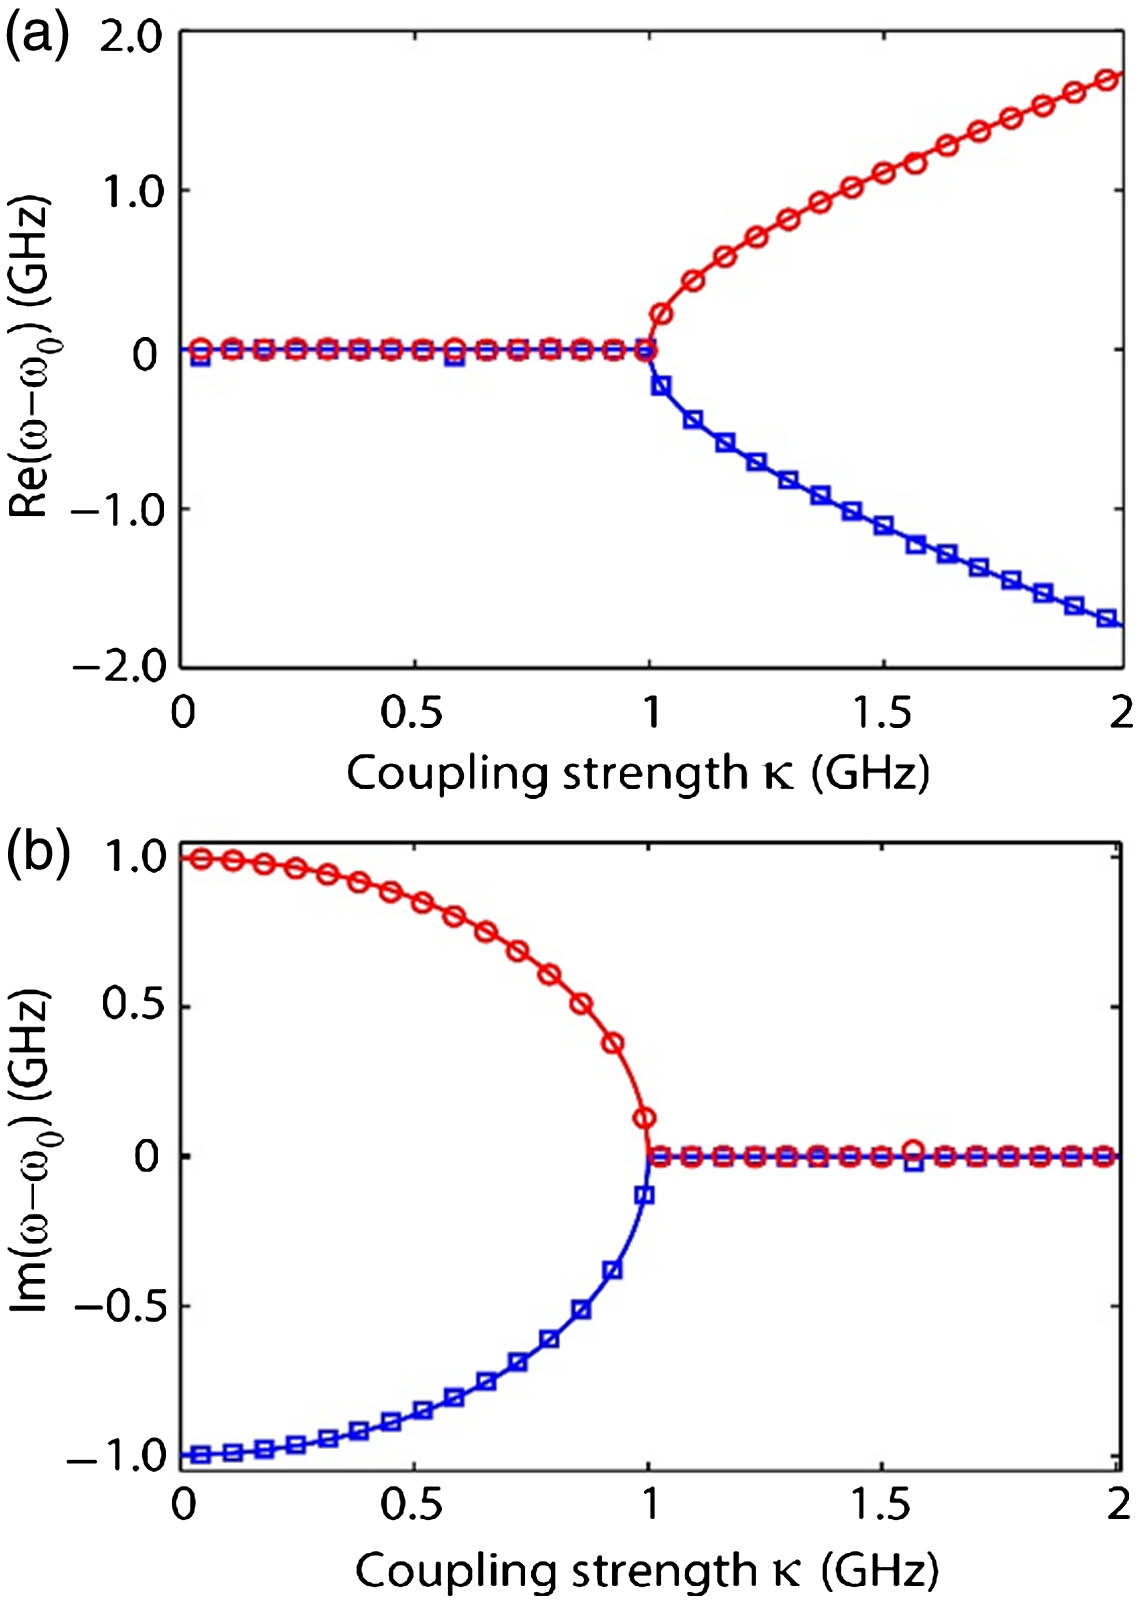 Evolution of the (a) real part and (b) imaginary part of eigenfrequencies in PT-symmetric coupled resonators when the coupling strength between two resonators is varied. The PT phase transition point is obtained when the coupling strength κ=κPT=1 GHz. The symbols are the results of numerical simulations, and the color curves are theoretical predictions.